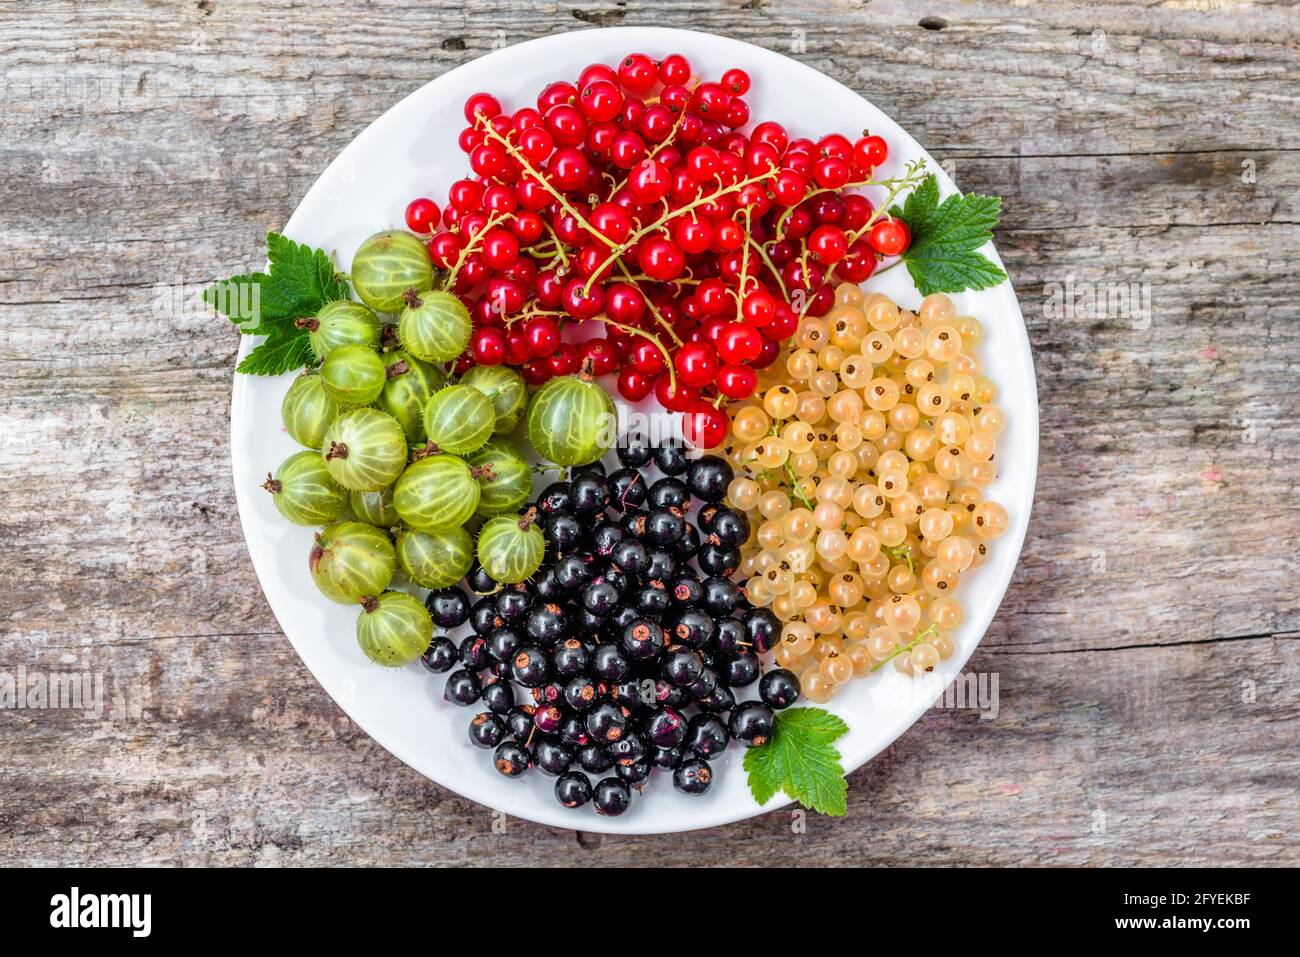 Summer fruits varieties: red currants, white currants and blackcurrants on plate, top view Stock Photo